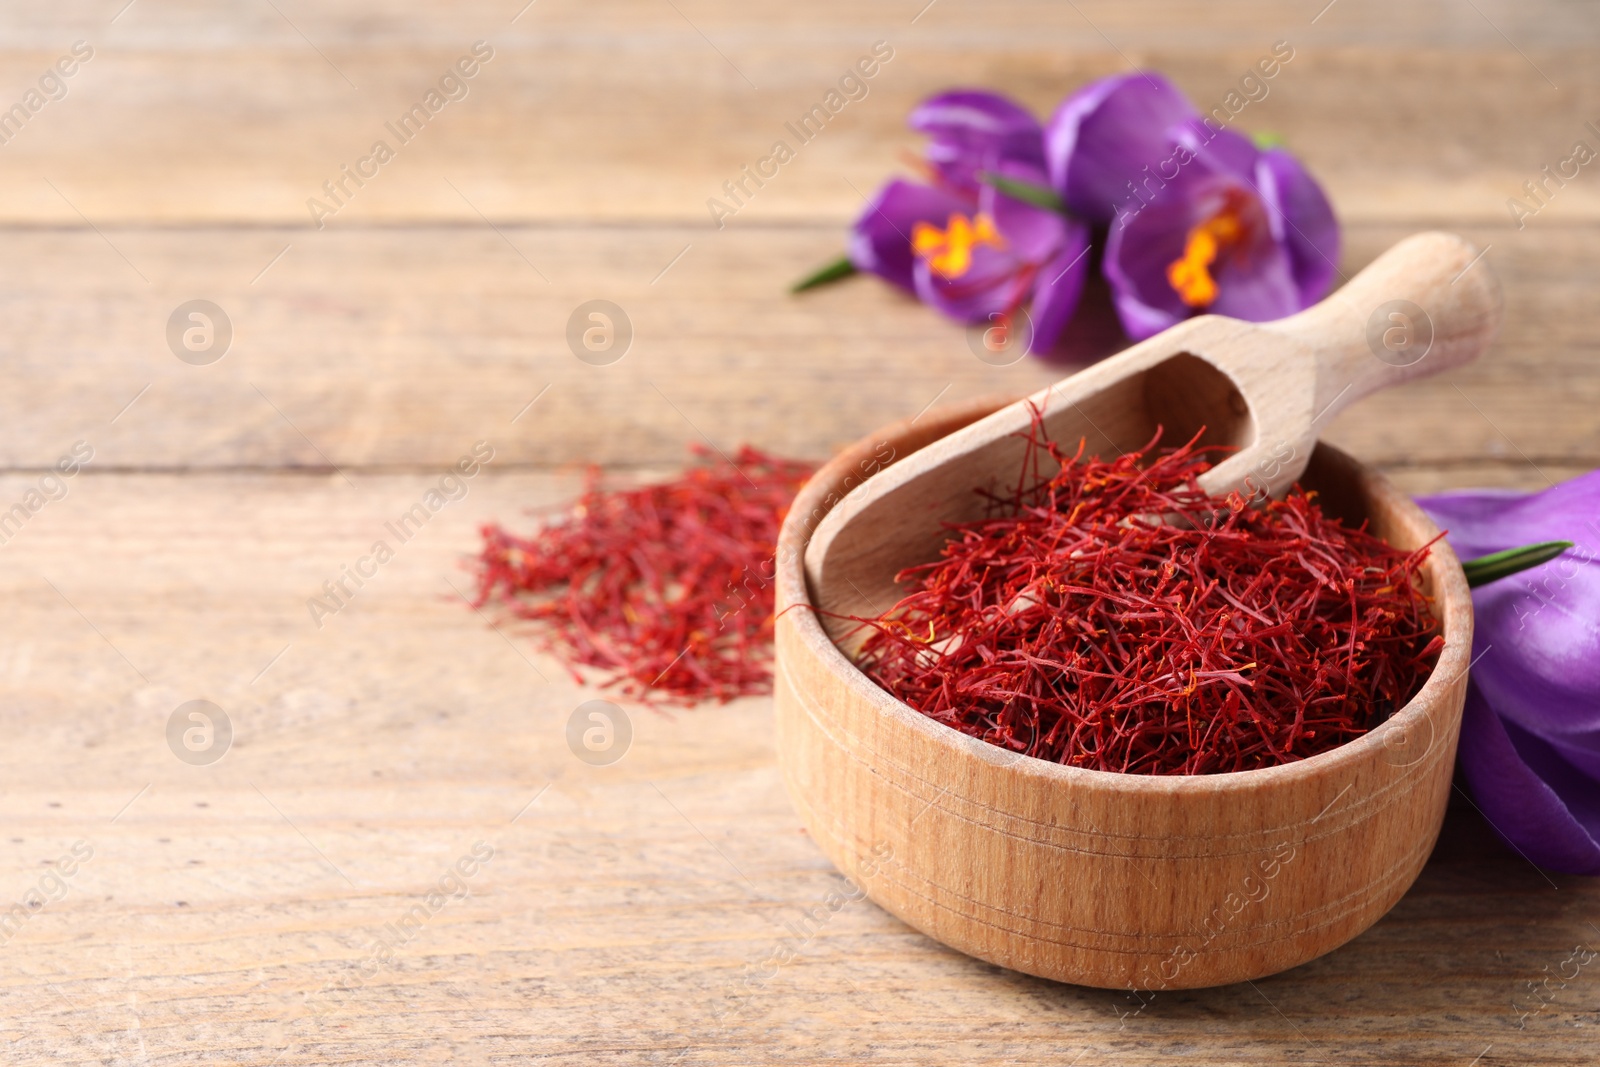 Photo of Dried saffron and crocus flowers on wooden table, space for text